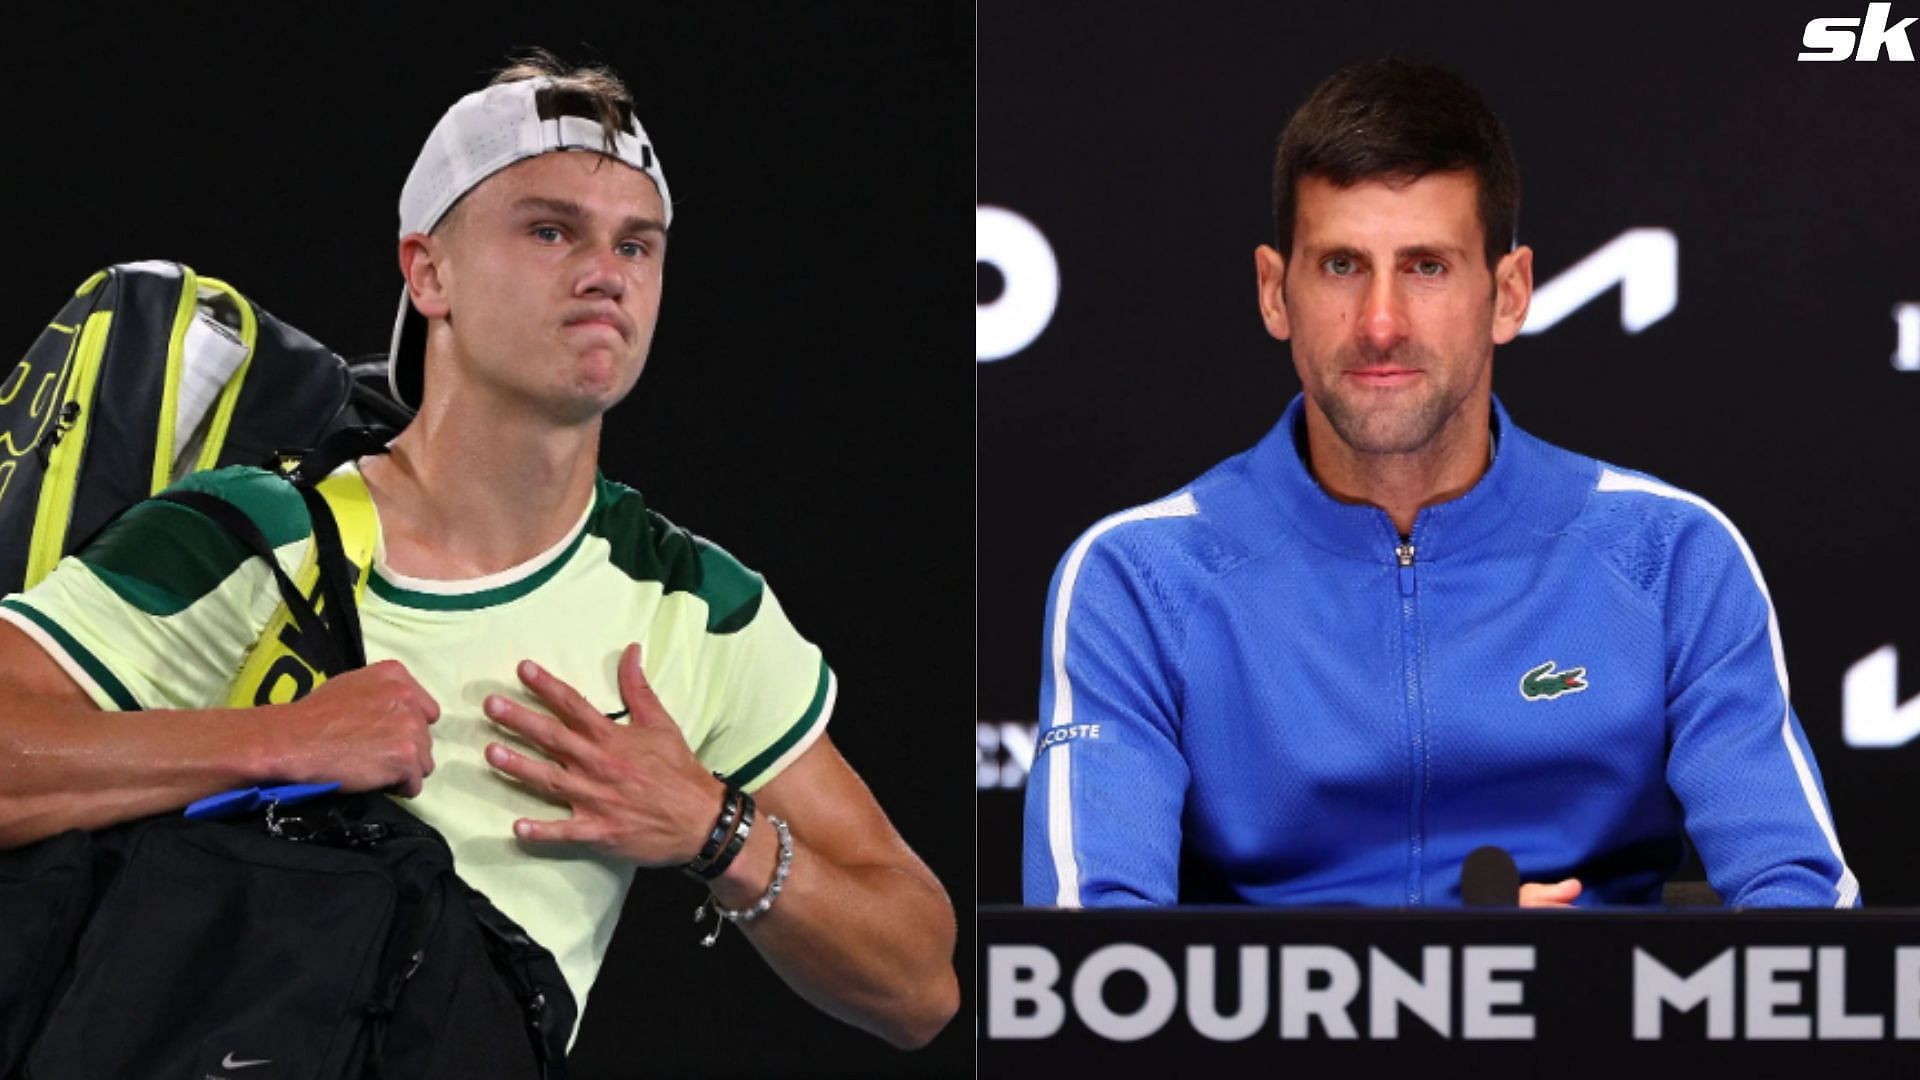 In light of Holger Rune's reunion with Patrick Mouratoglou, here's a look at 5 tennis players who reappointed their former coach ft. Novak Djokovic